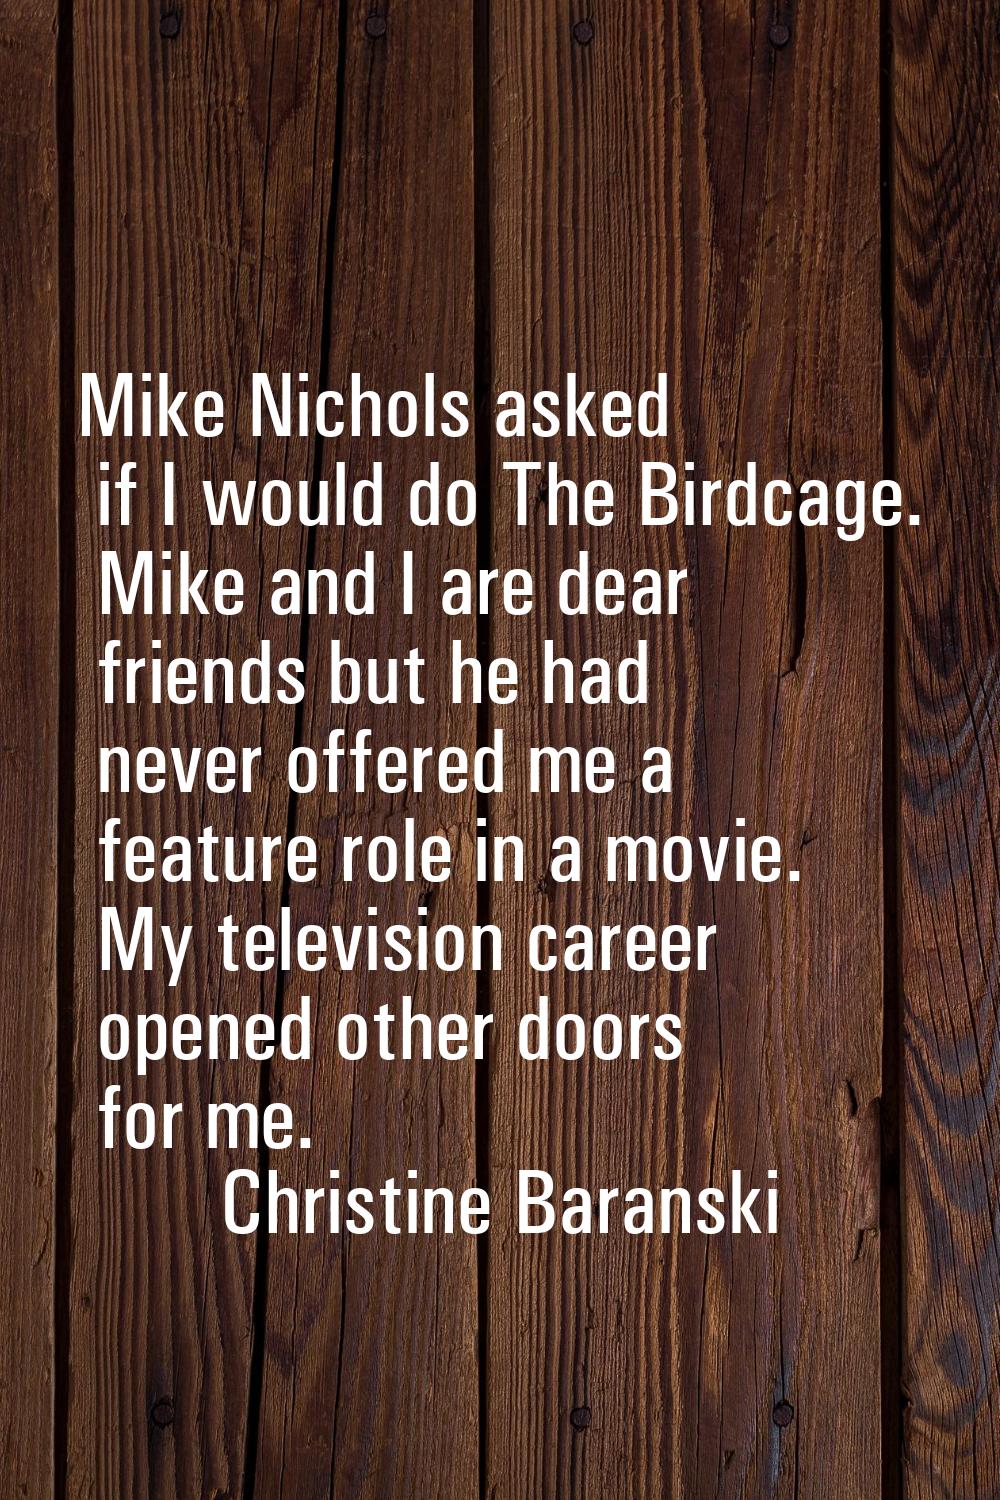 Mike Nichols asked if I would do The Birdcage. Mike and I are dear friends but he had never offered